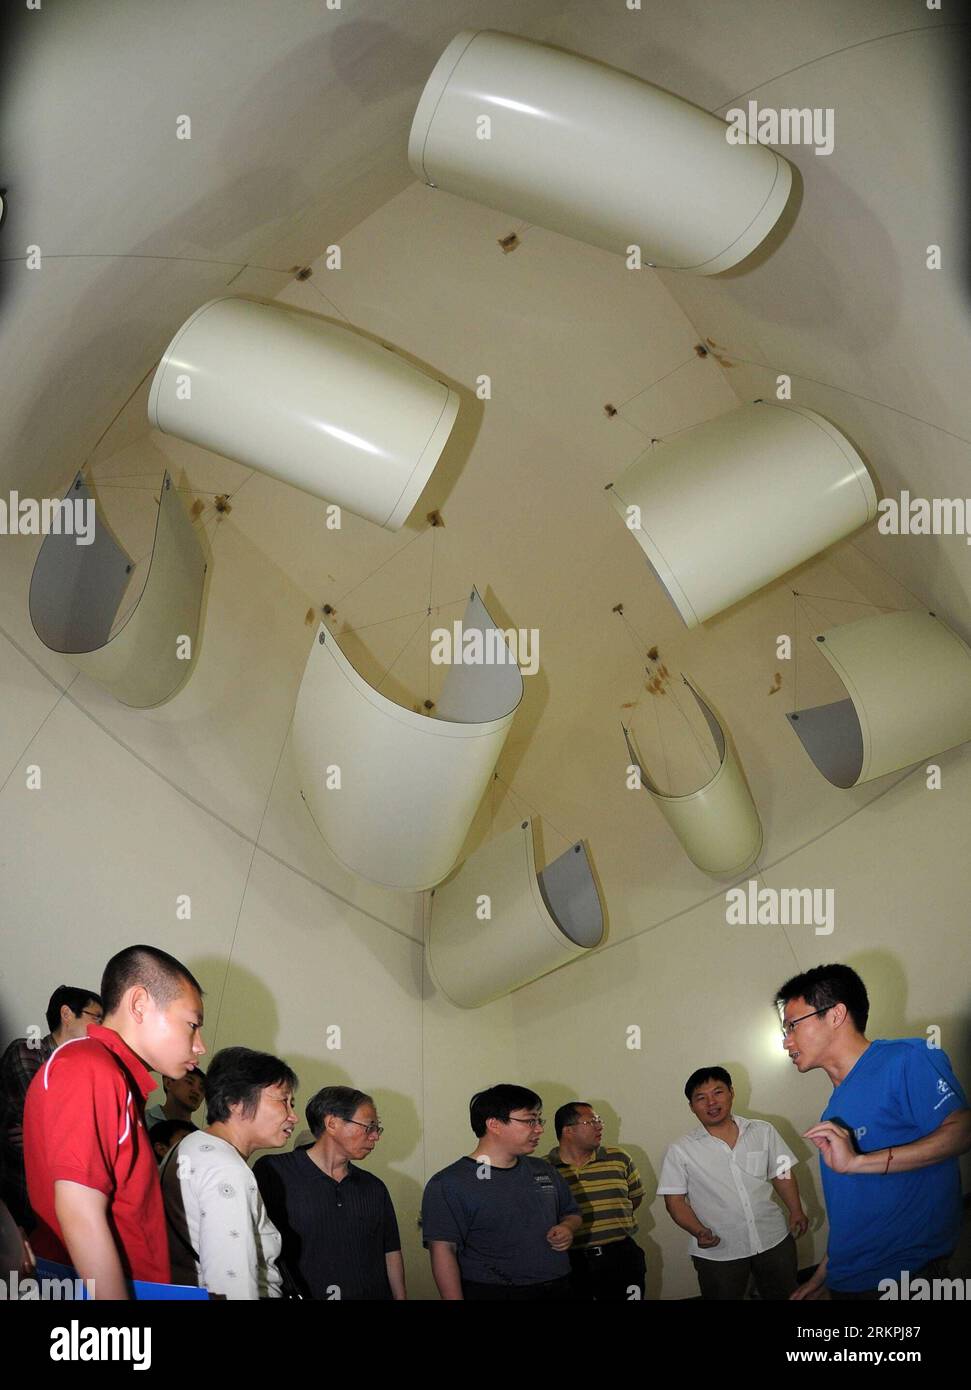 Bildnummer: 58005816  Datum: 19.05.2012  Copyright: imago/Xinhua (120519) -- BEIJING, May 19, 2012 (Xinhua) -- Visitors learn the acoustics knowledge at the Institute of Acoustics of the Chinese Academy of Sciences in Beijing, capital of China, May 19, 2012. A series of activities were held in different cities across the country to launch the Science and Technology Week on Saturday. (Xinhua/Gong Lei) (ry) CHINA-SCIENCE AND TECHNOLOGY WEEK-ACTIVITIES (CN) PUBLICATIONxNOTxINxCHN Gesellschaft Bildung Schule Grundschule Fotostory xda x1x 2012 hoch o0 Uboot, unterseeboot  U boot technik technologie Stock Photo